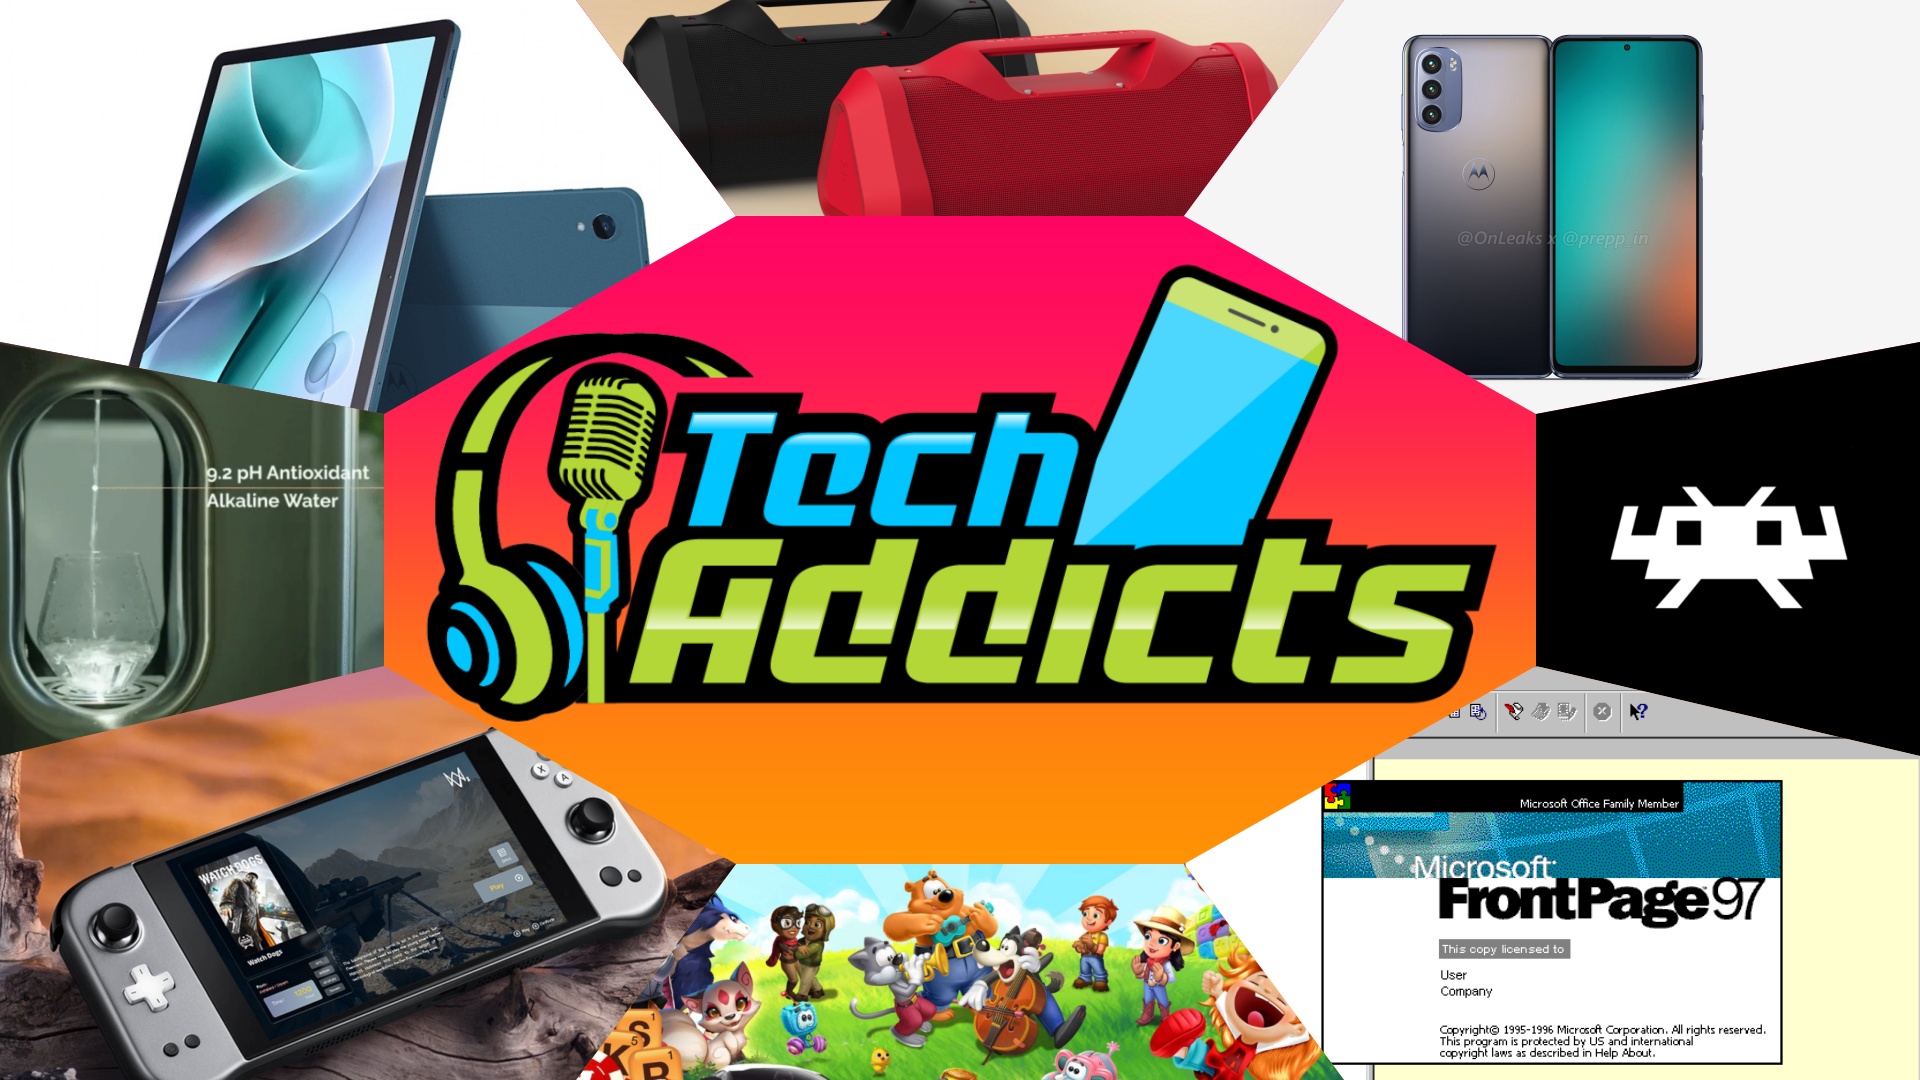 Tech Addicts Podcast – Sunday 16th January – Ripple me this